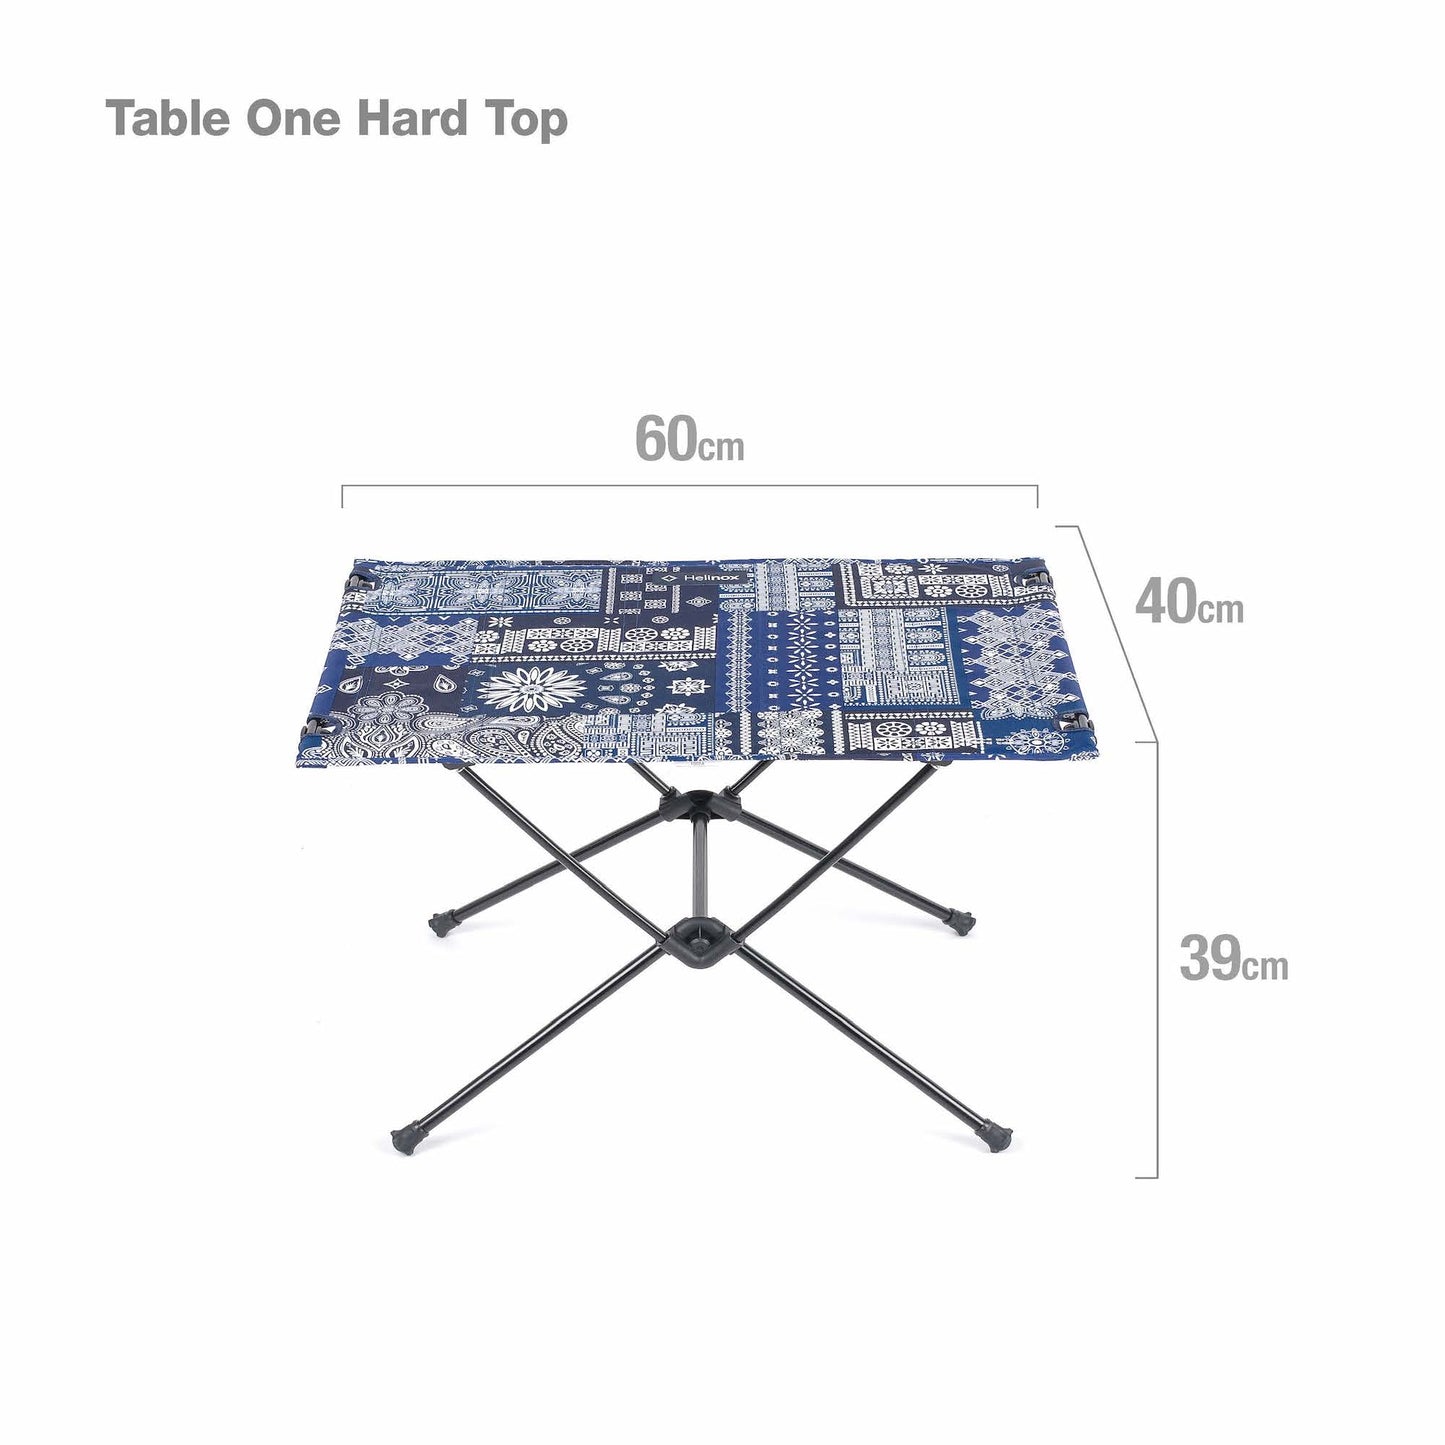 Table One Hard Top - Blue Bandanna Quilt